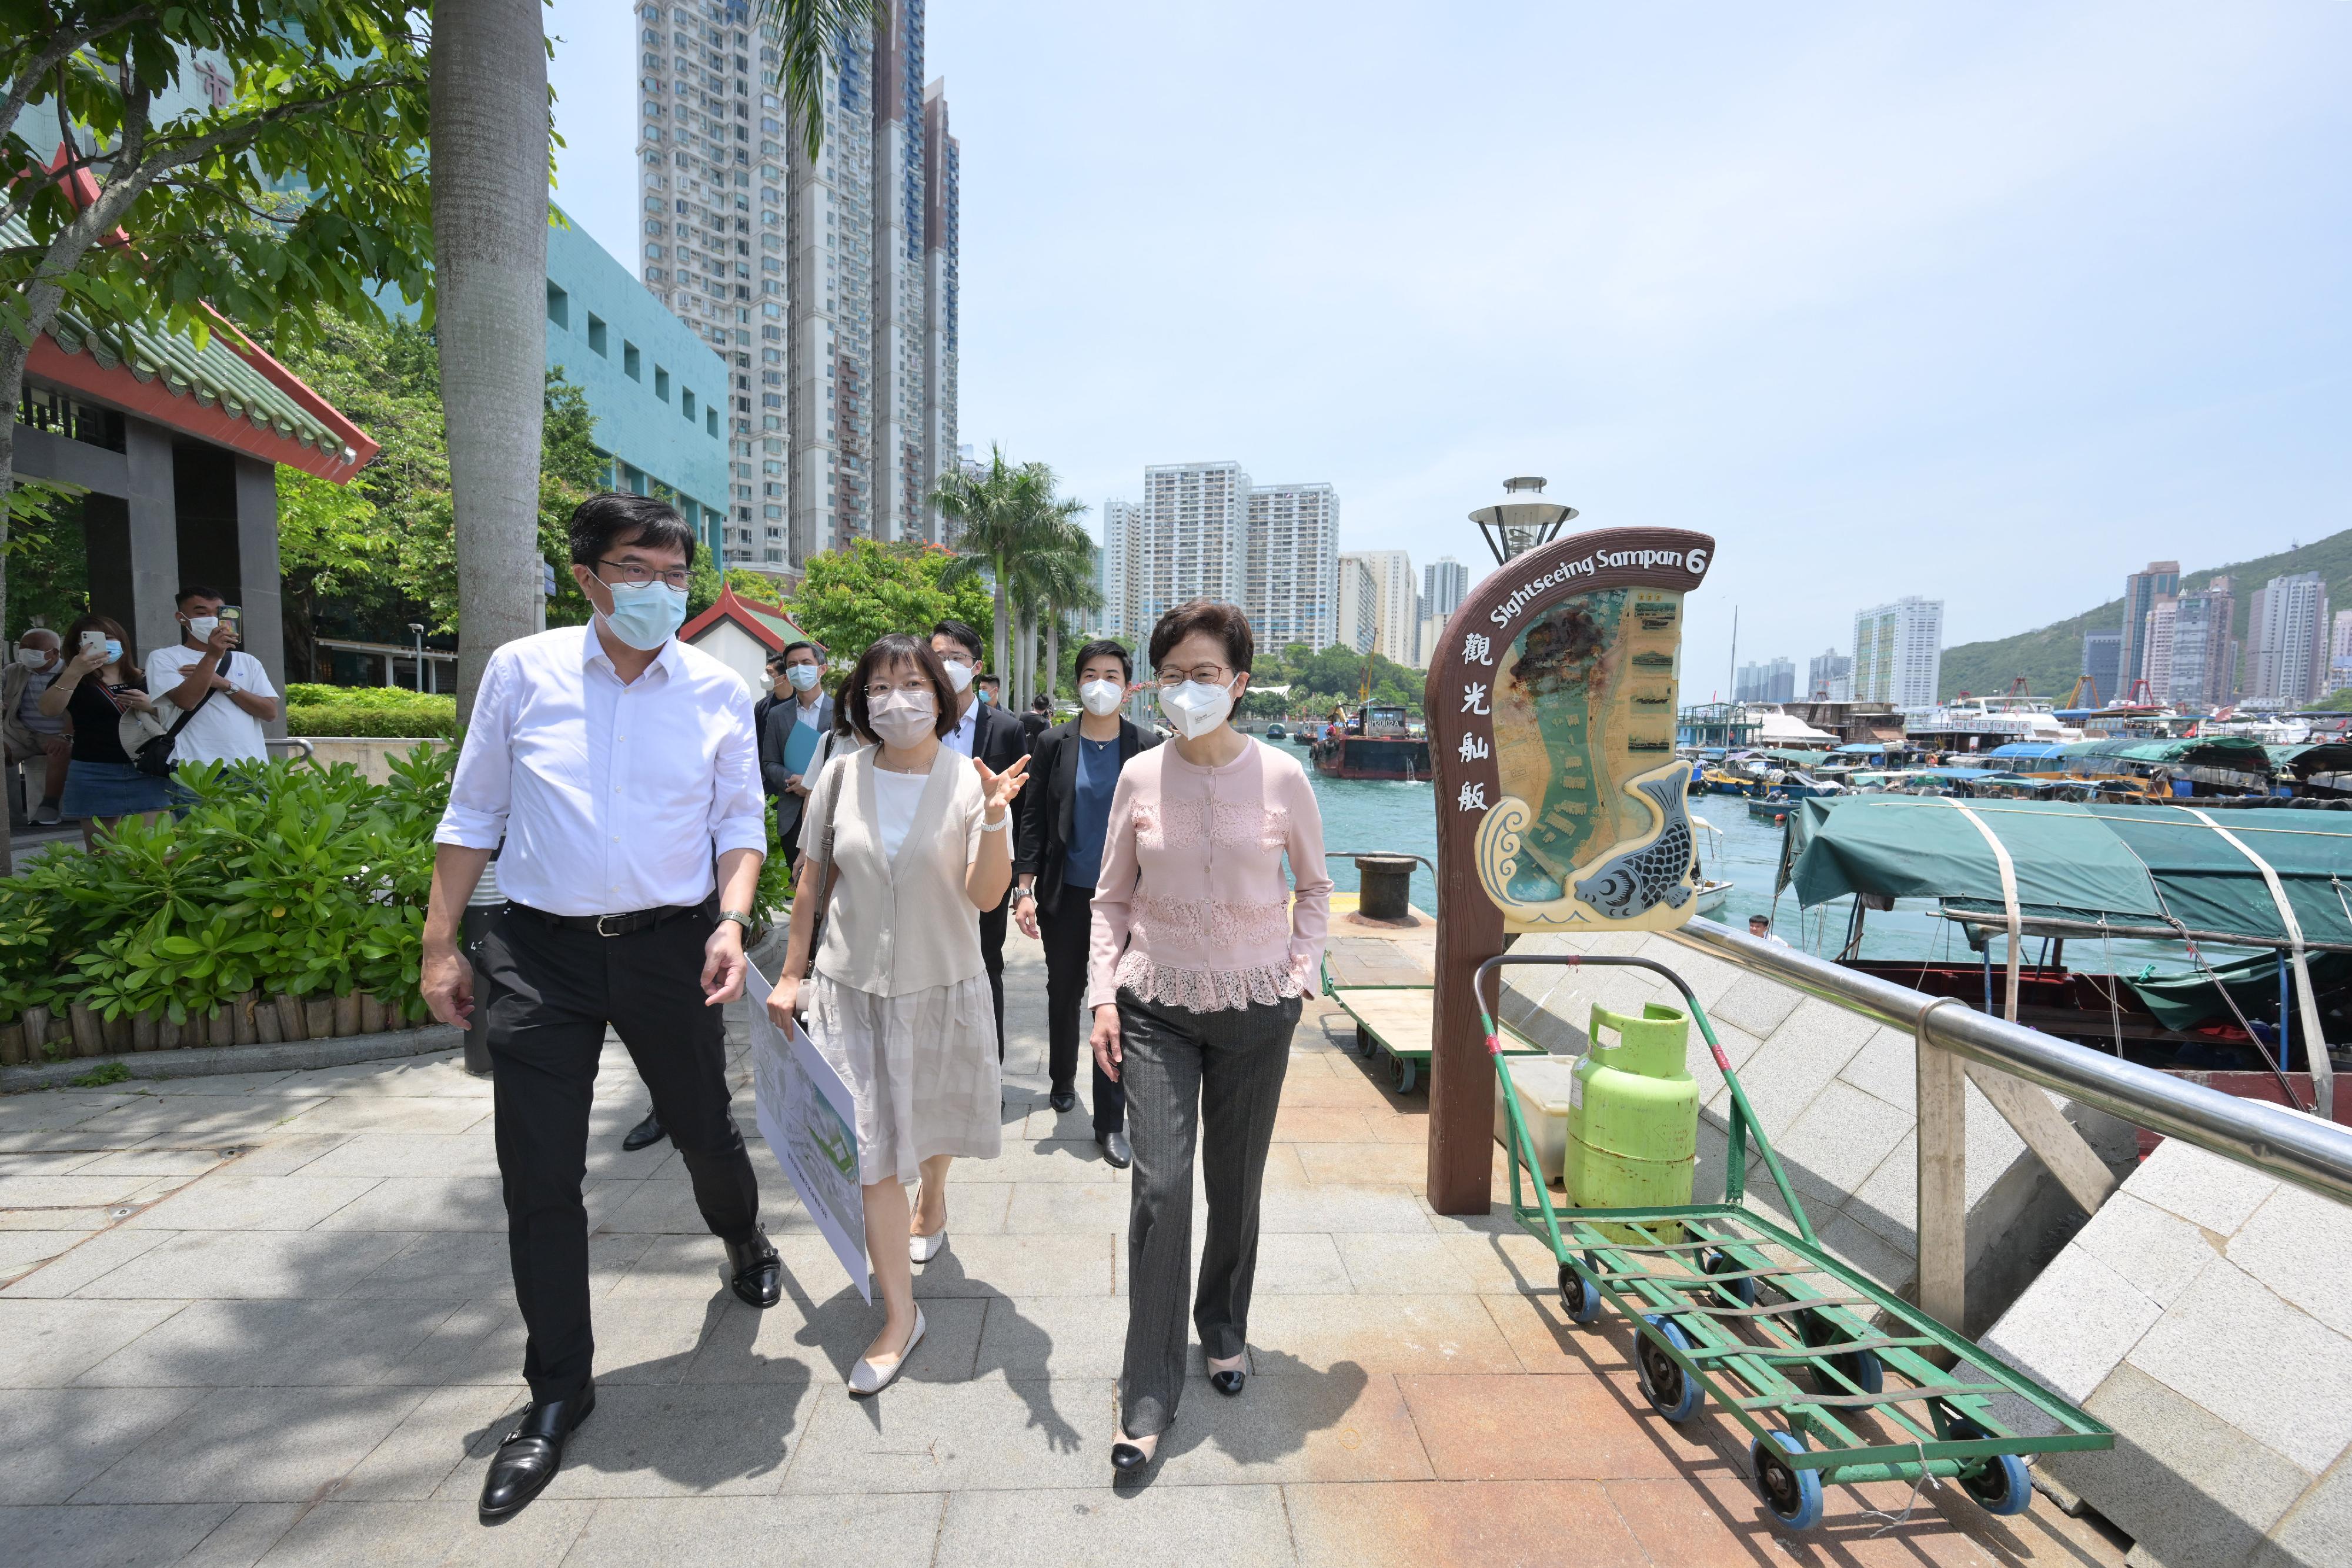 The Chief Executive, Mrs Carrie Lam, today (May 5) visited Wong Chuk Hang and Ap Lei Chau in Southern District to learn about the progress of the Invigorating Island South initiative. Photo shows Mrs Lam (front, right) touring the Ap Lei Chau Waterfront Promenade. Also present are the Secretary for Development, Mr Michael Wong (front, left), and the Head of the Invigorating Island South Office, Ms Brenda Au (front, centre).